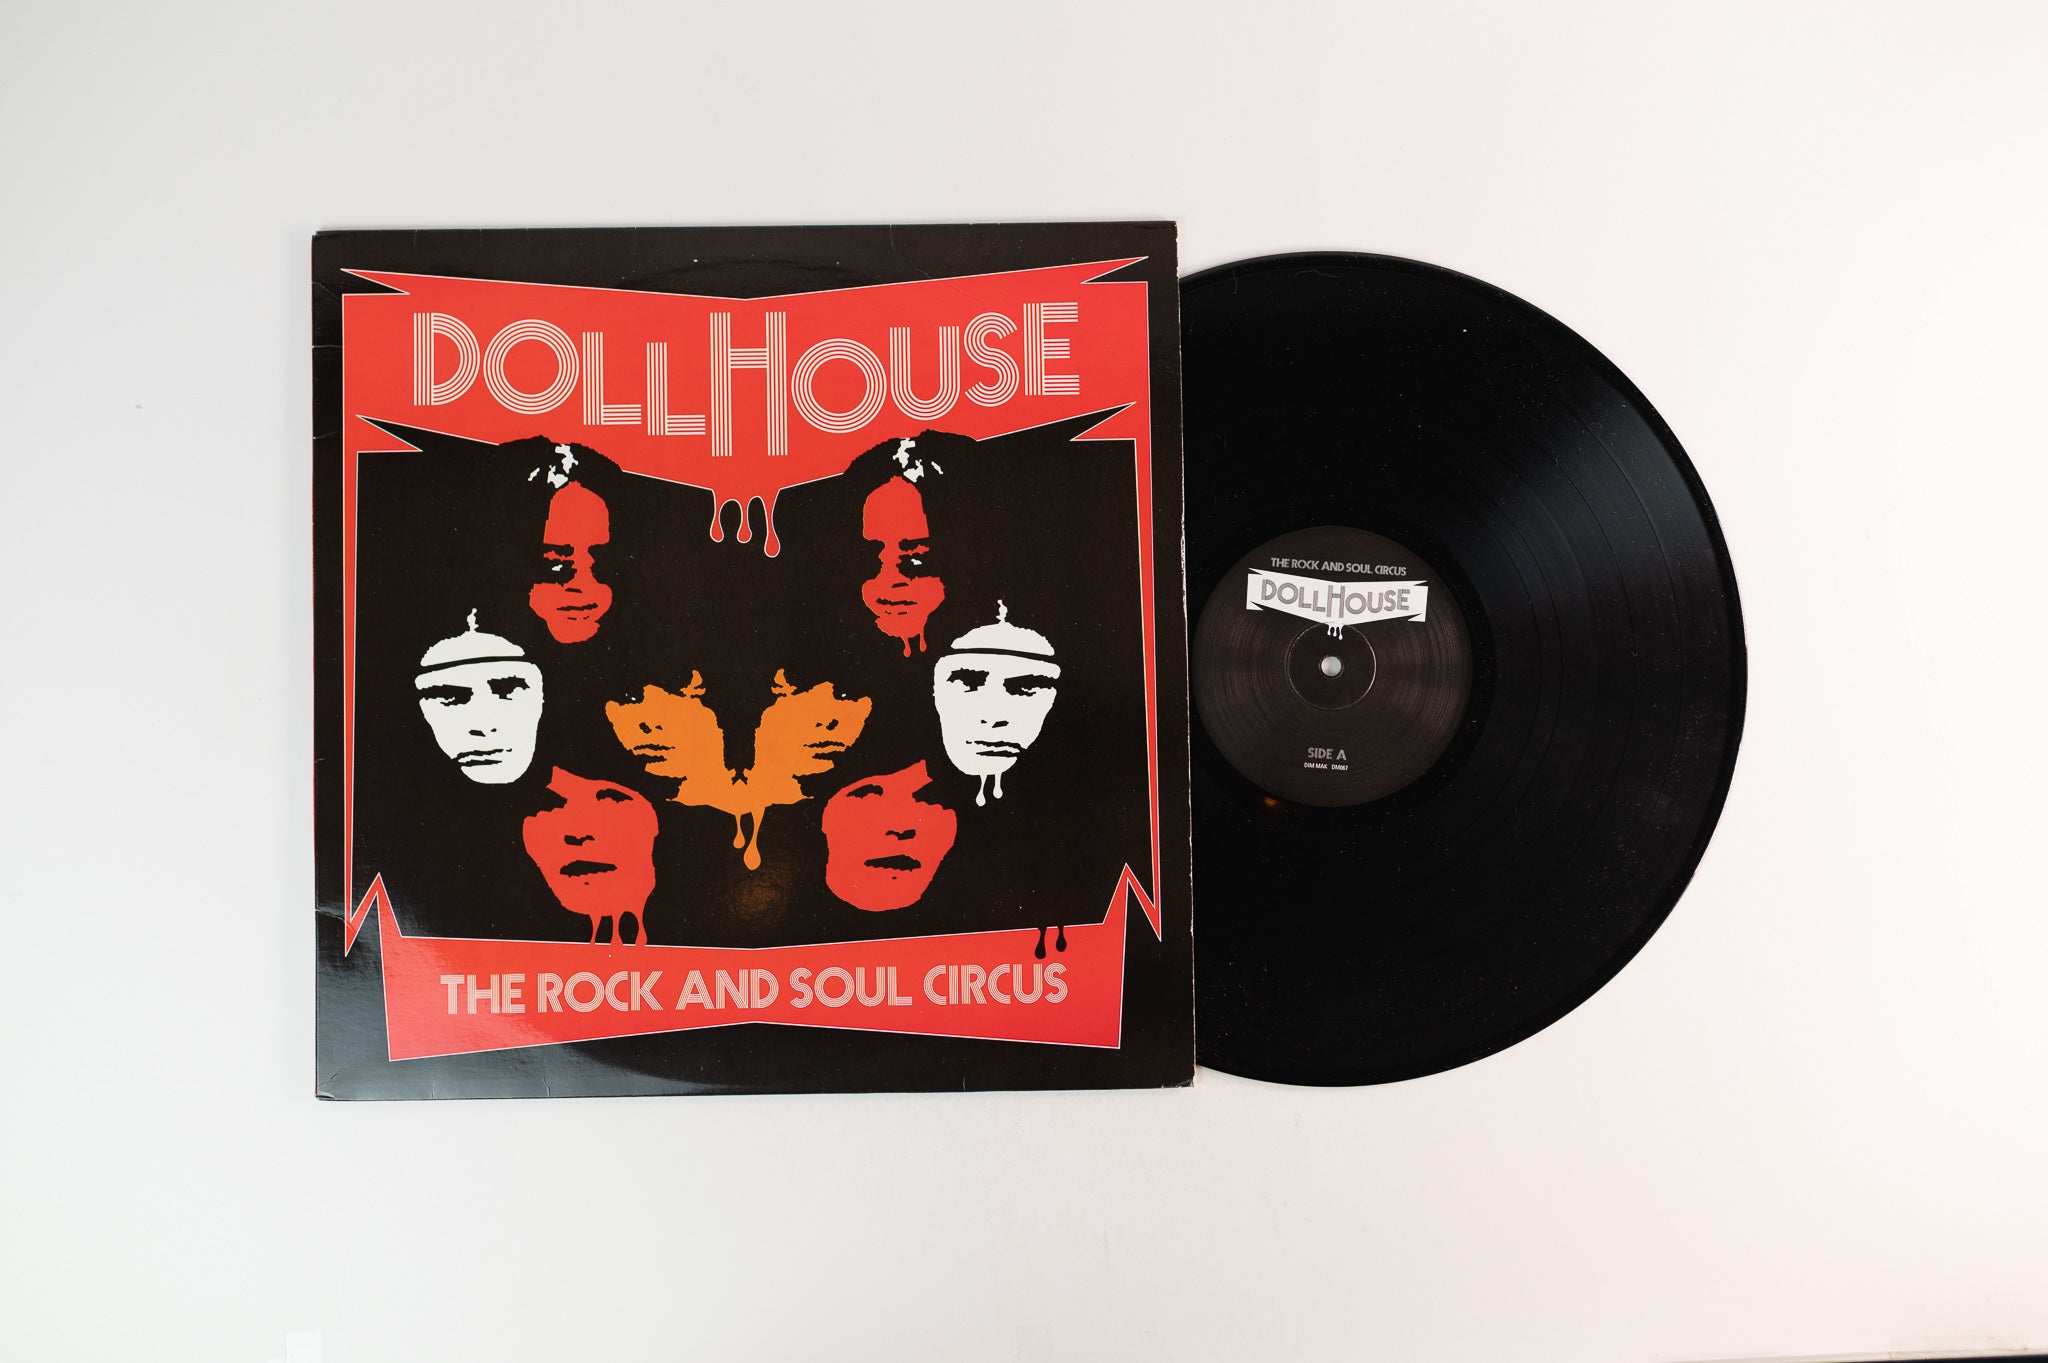 Dollhouse - The Rock And Soul Circus on Dim Mak Records